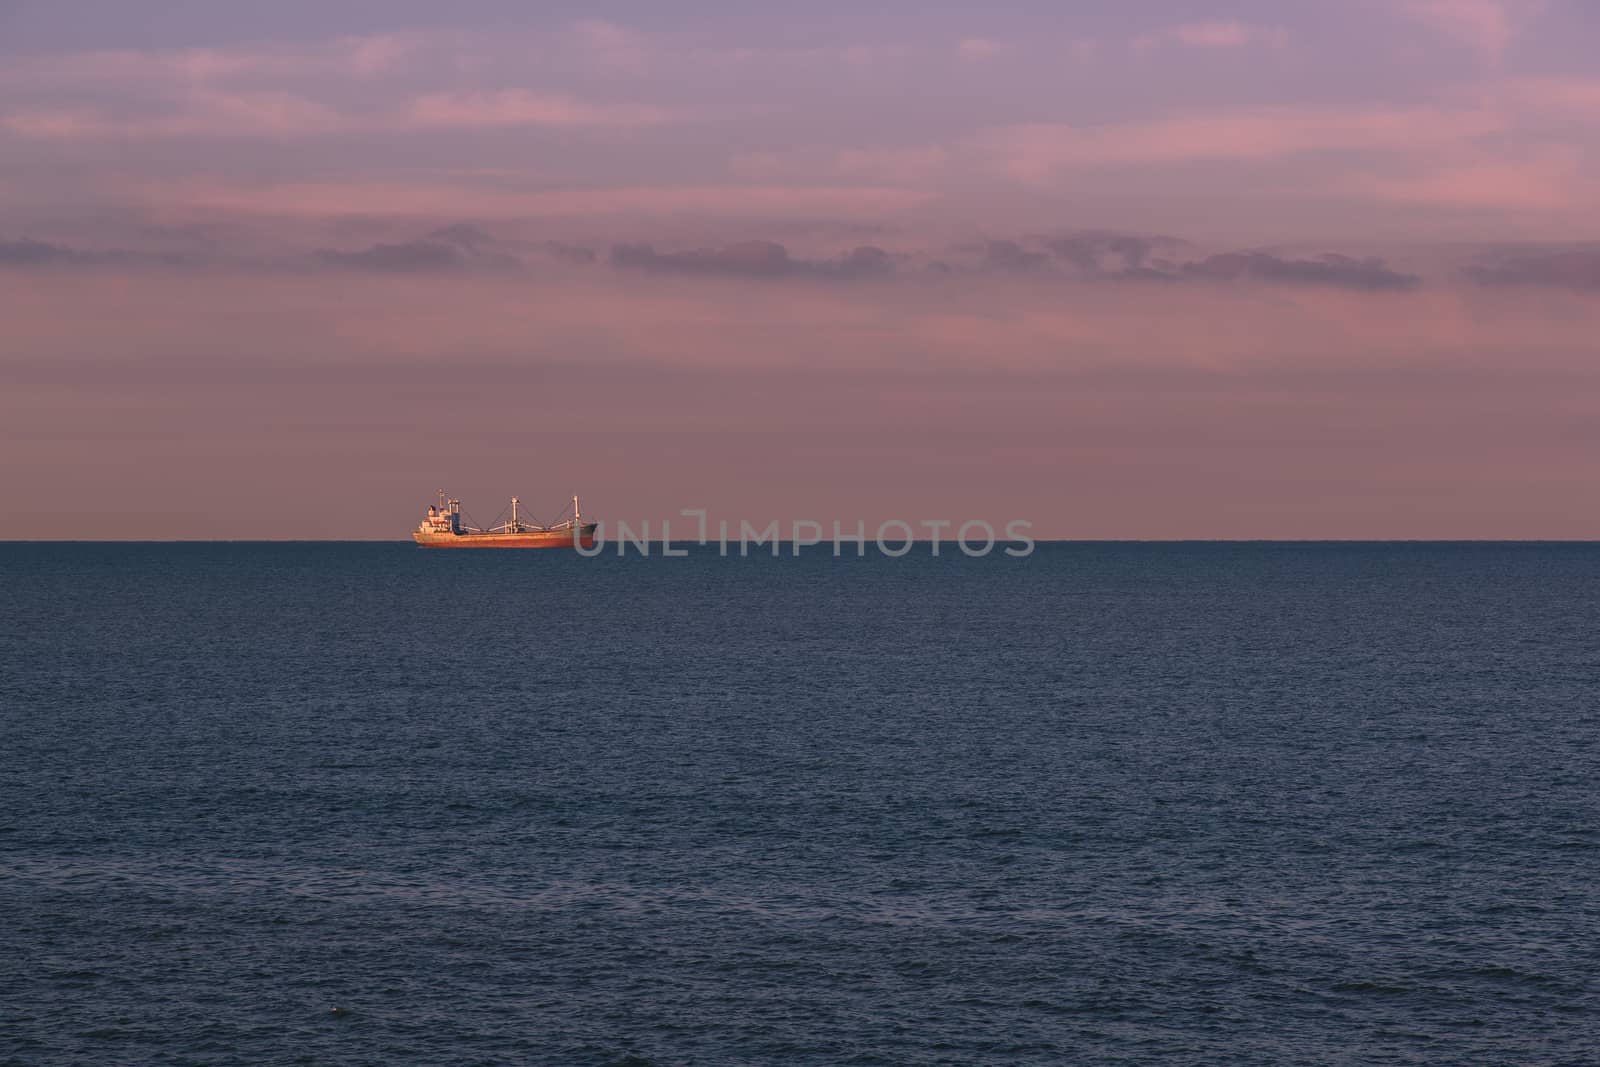 Seascape with a merchant ship in the background